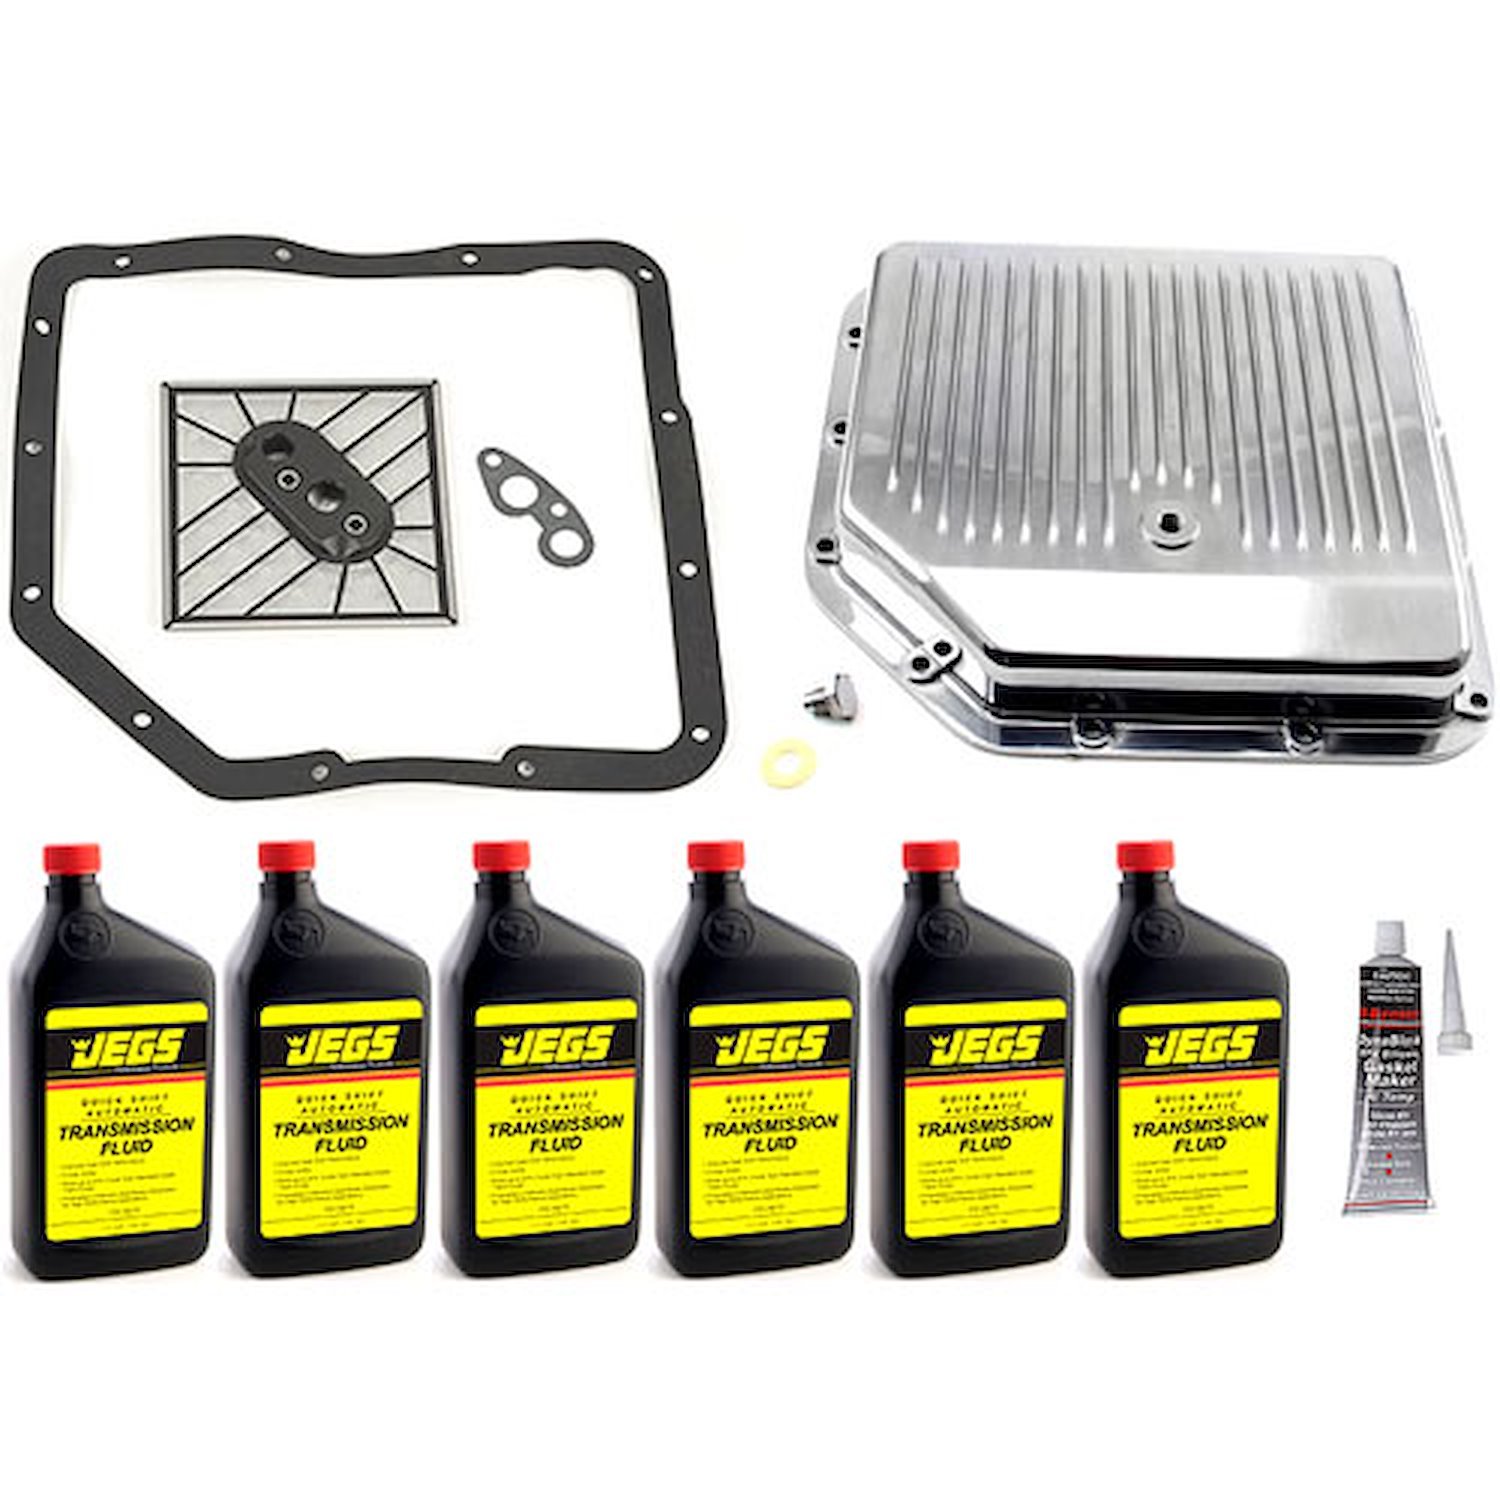 TH350 Transmission Pan Kit Includes: Speedmaster TH350 Finned